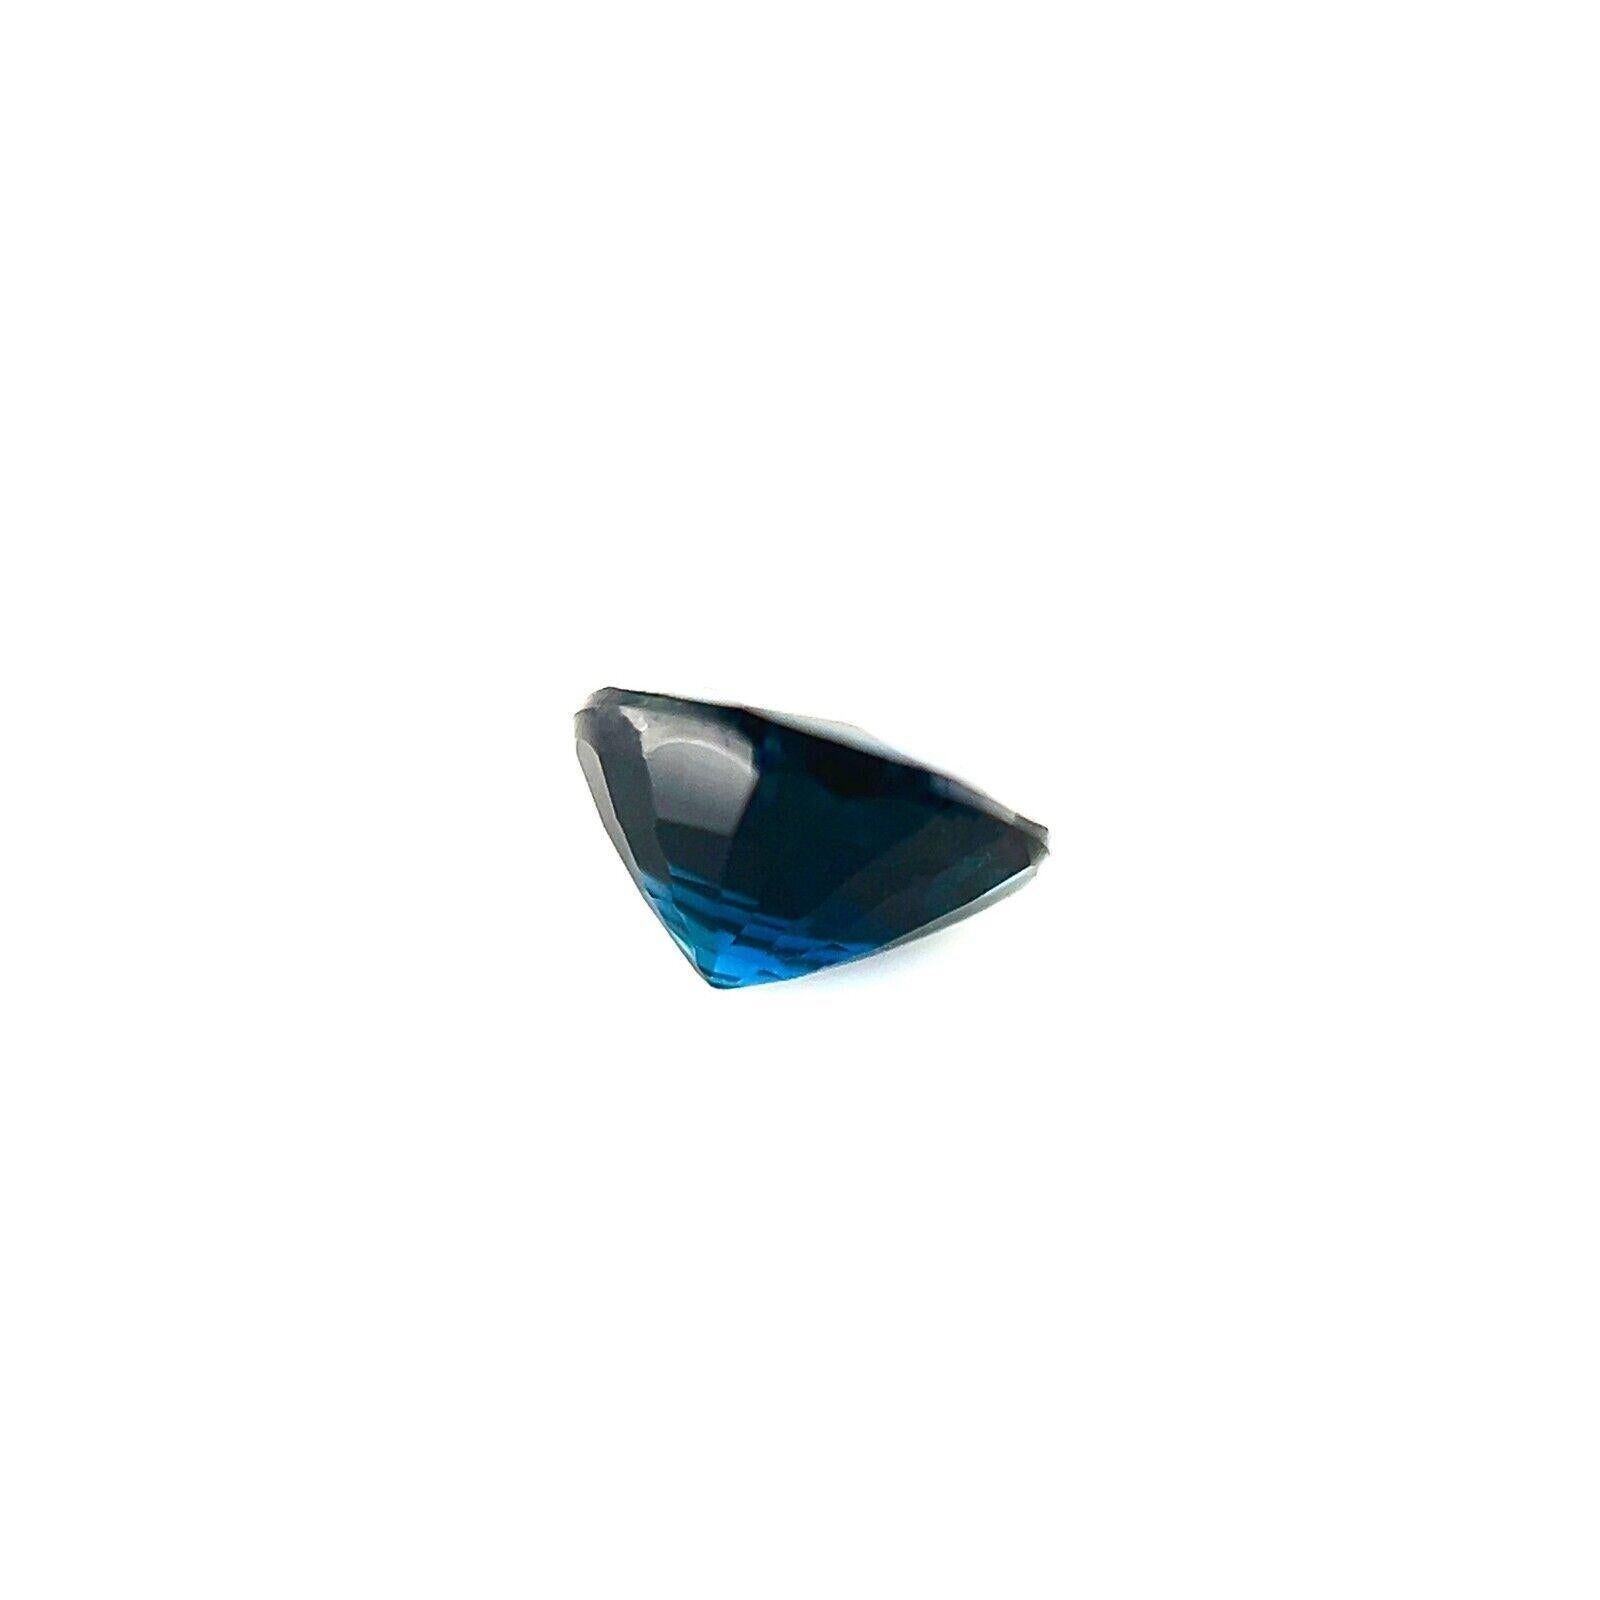 Royal Blue 0.68ct Australian VS Sapphire Oval Cut Loose Gem 5.6x4.8mm

Natural Australian Blue Sapphire Gemstone.
0.68 Carat stone with a beautiful green blue colour and excellent clarity, a very clean stone with only some small natural inclusions